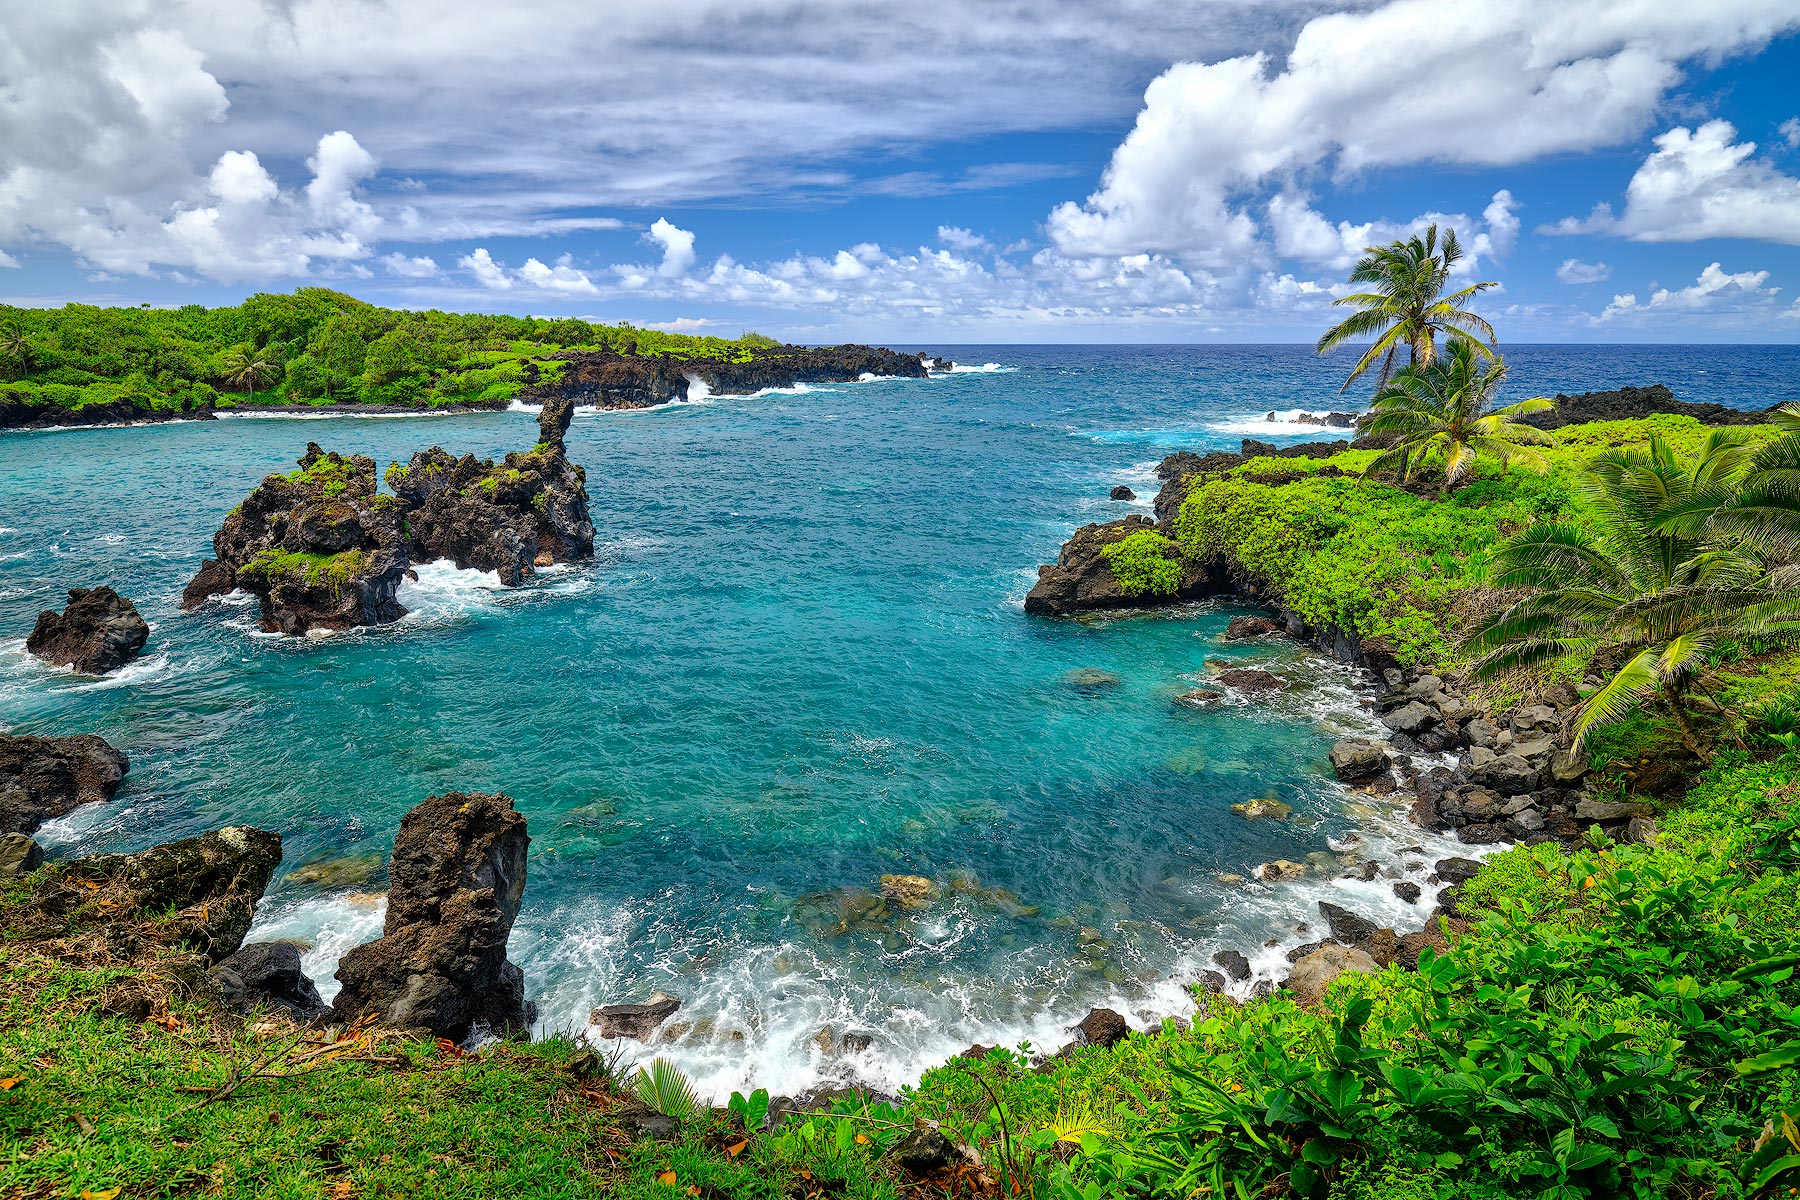 a photograph featuring the beautiful turquoise waters of Waianapanapa state park on the Hawaiian island of Maui.  Hawaii Nature Photography by Andrew Shoemaker